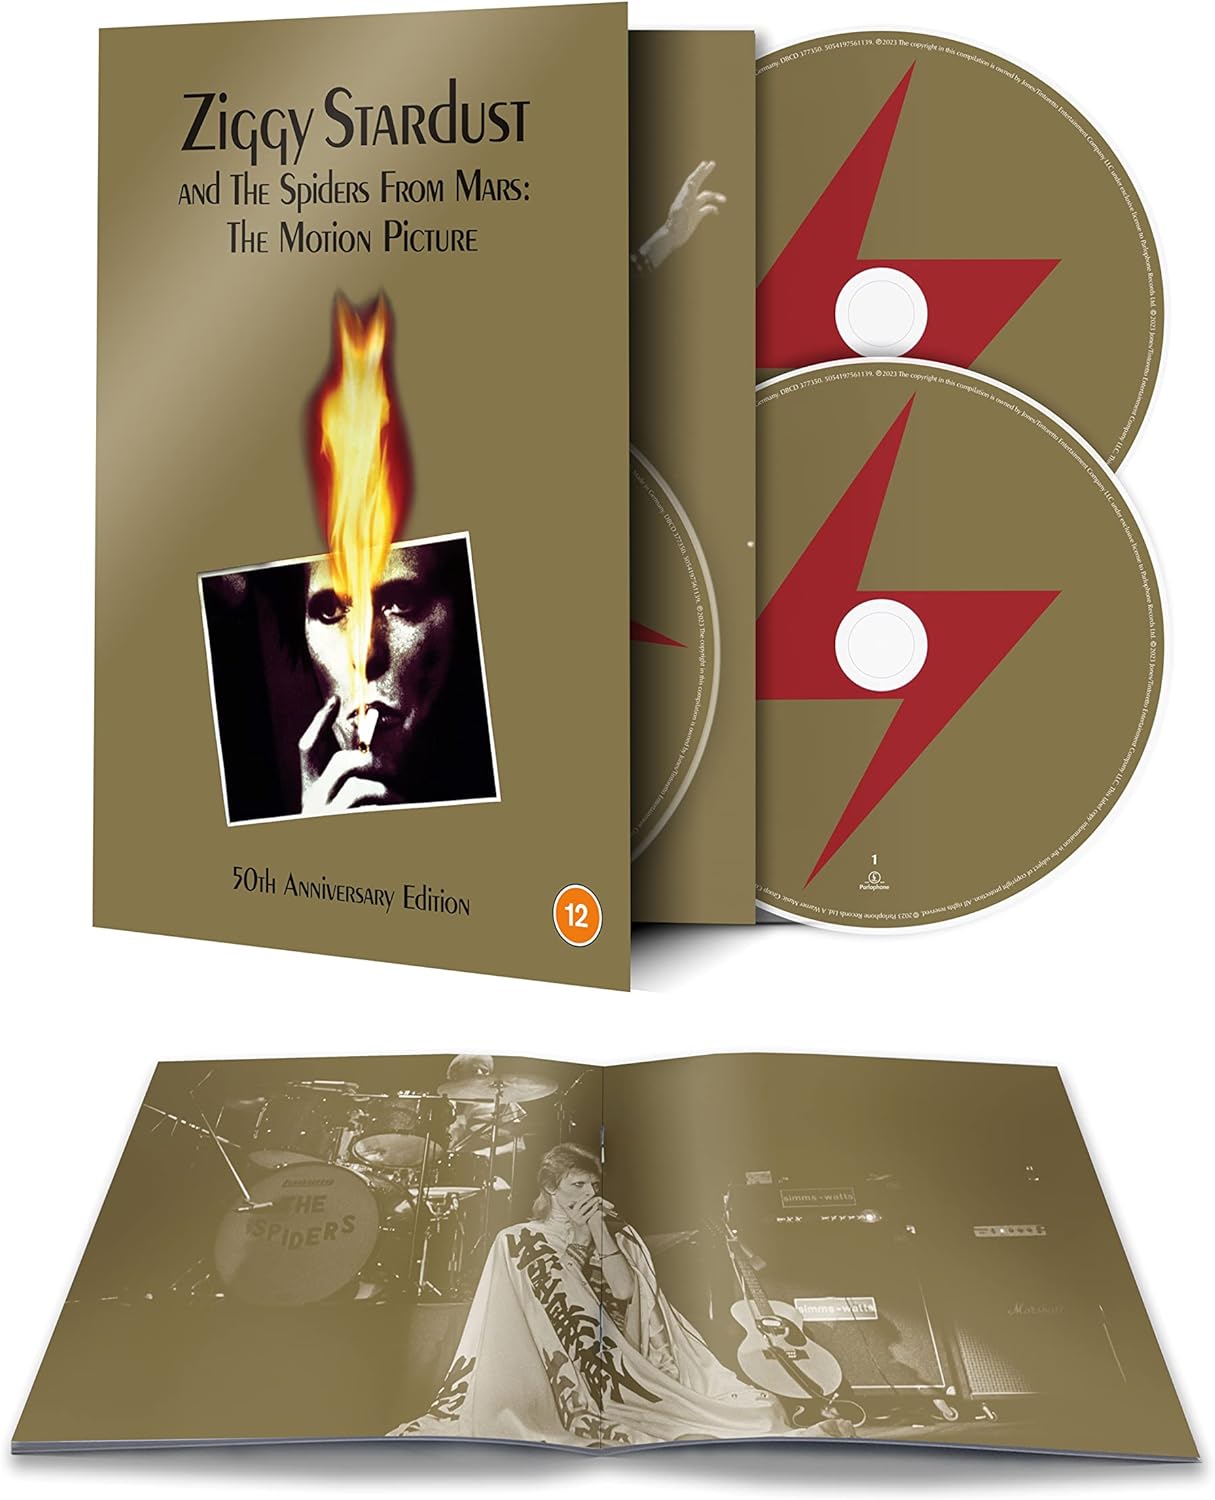 Ziggy Stardust And The Spiders From Mars: The Motion Picture (Blu-ray + 2xCD, 50th Anniversary Edition) | David Bowie